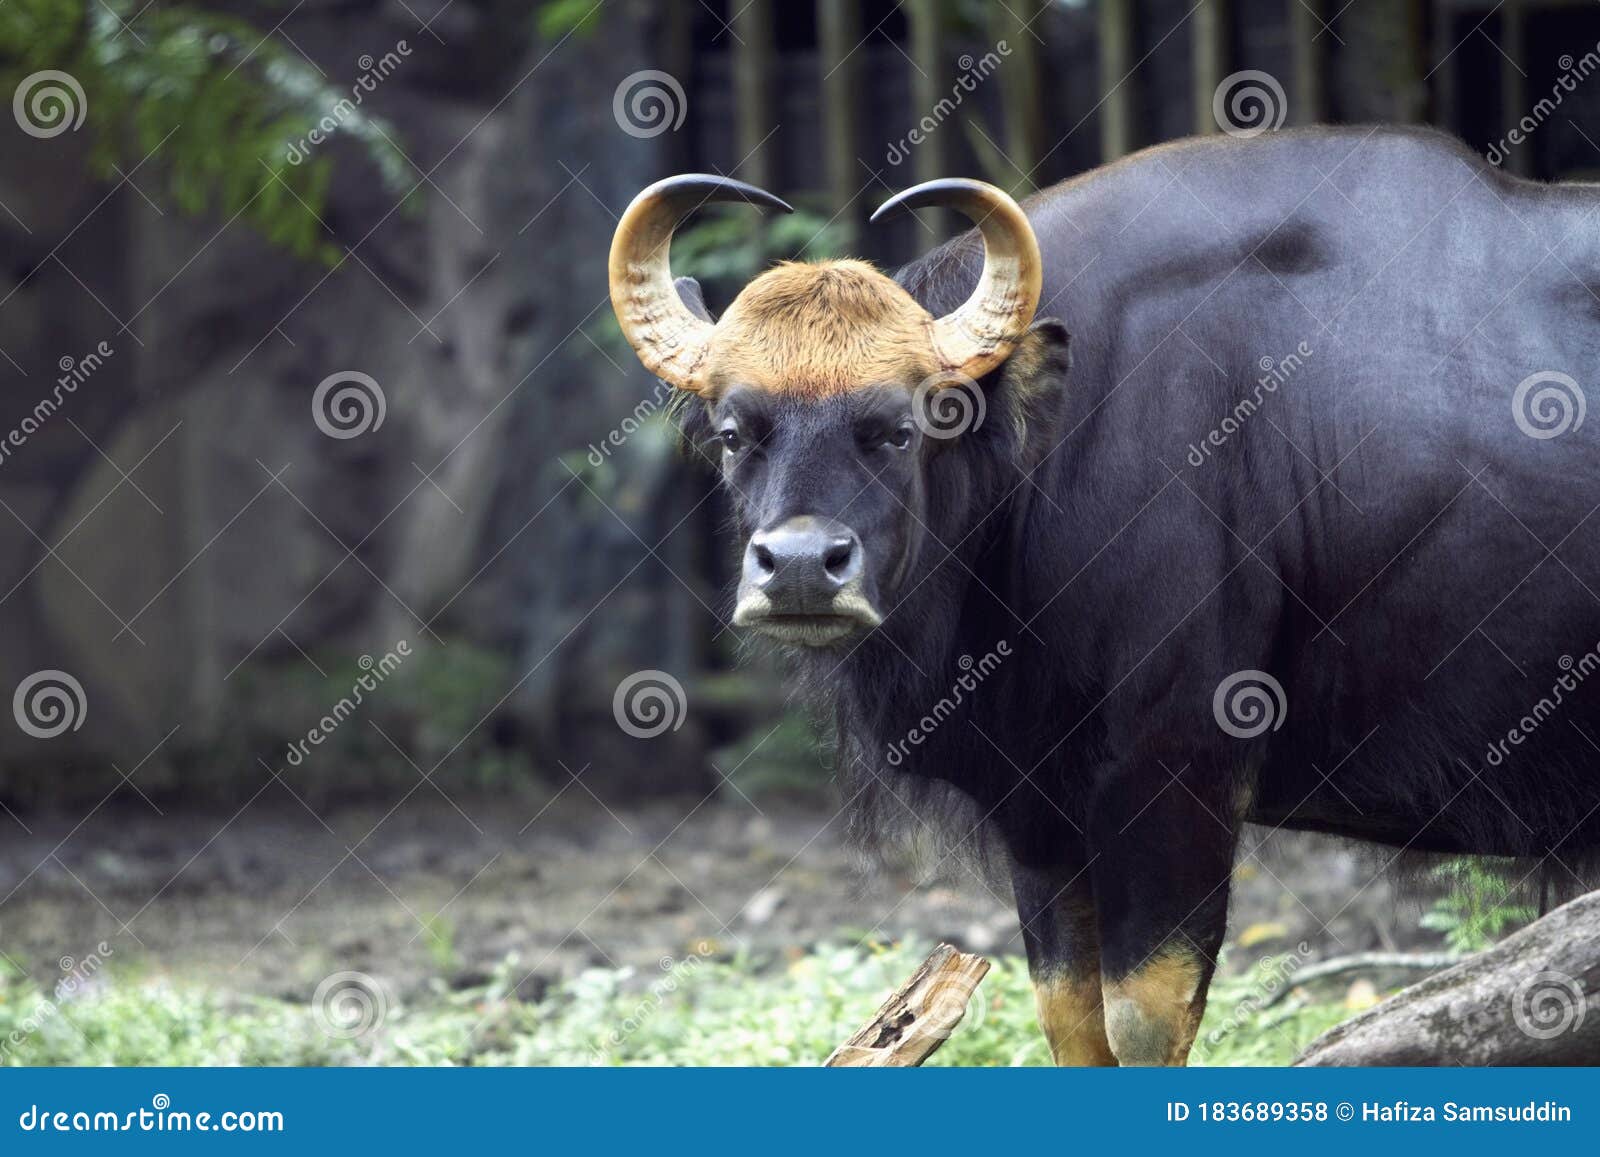 Bison in malay